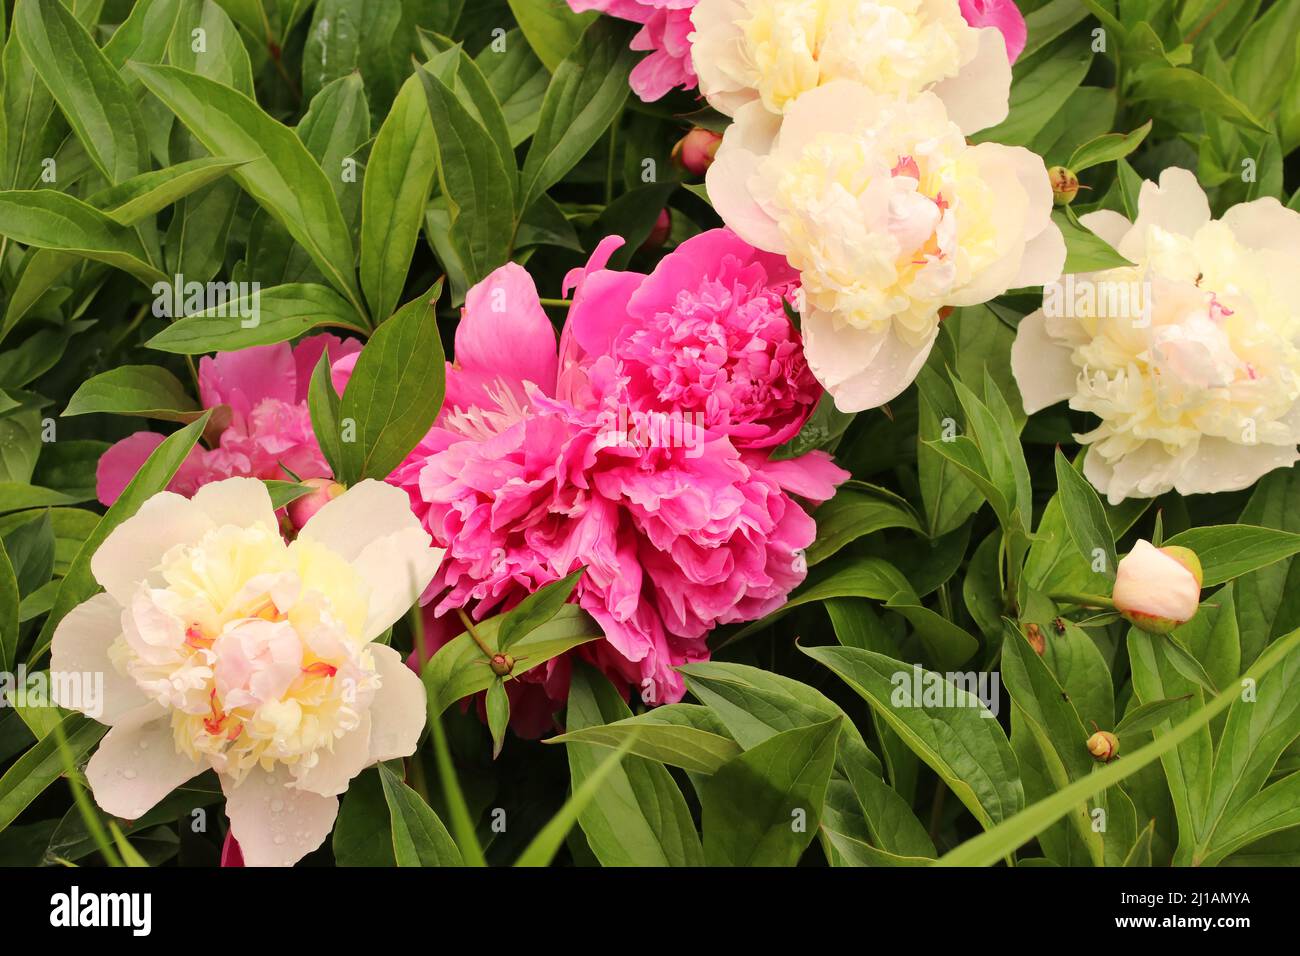 White and red flowers peony flowering on blurred background. Selective focus. Stock Photo